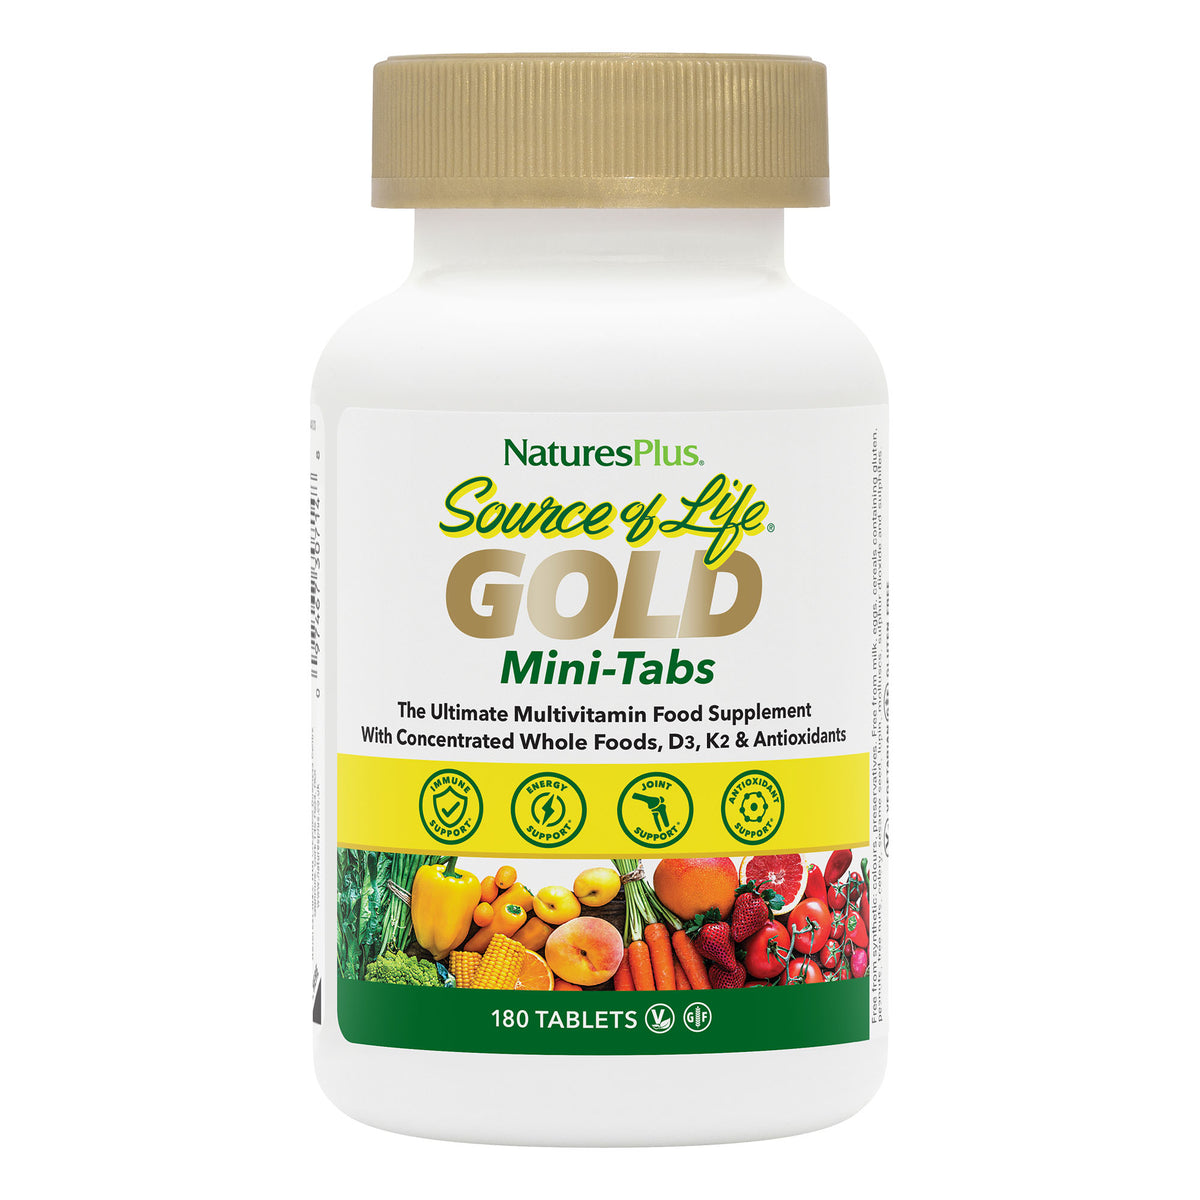 product image of Source of Life® GOLD Multivitamin Mini-Tabs containing Source of Life® GOLD Multivitamin Mini-Tabs